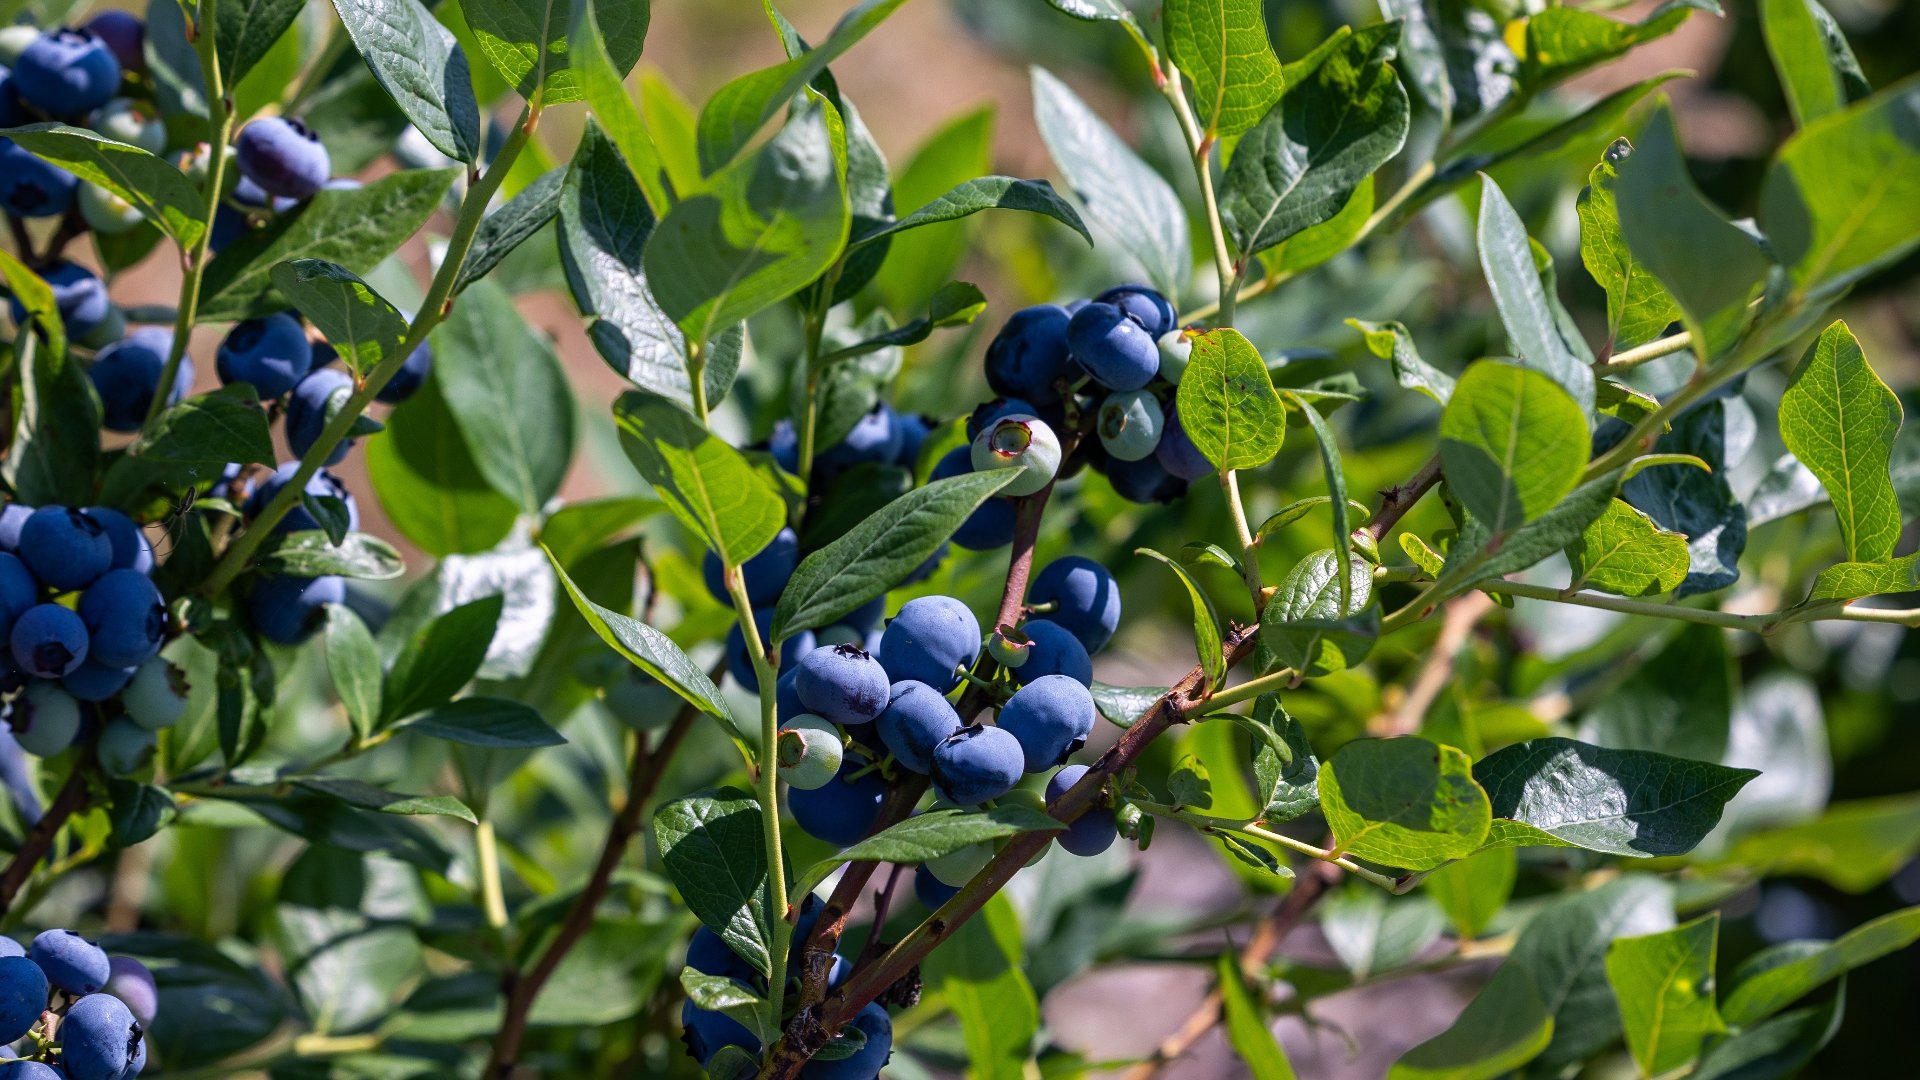 What Is the Best Type of Irrigation System for Blueberry Crops?